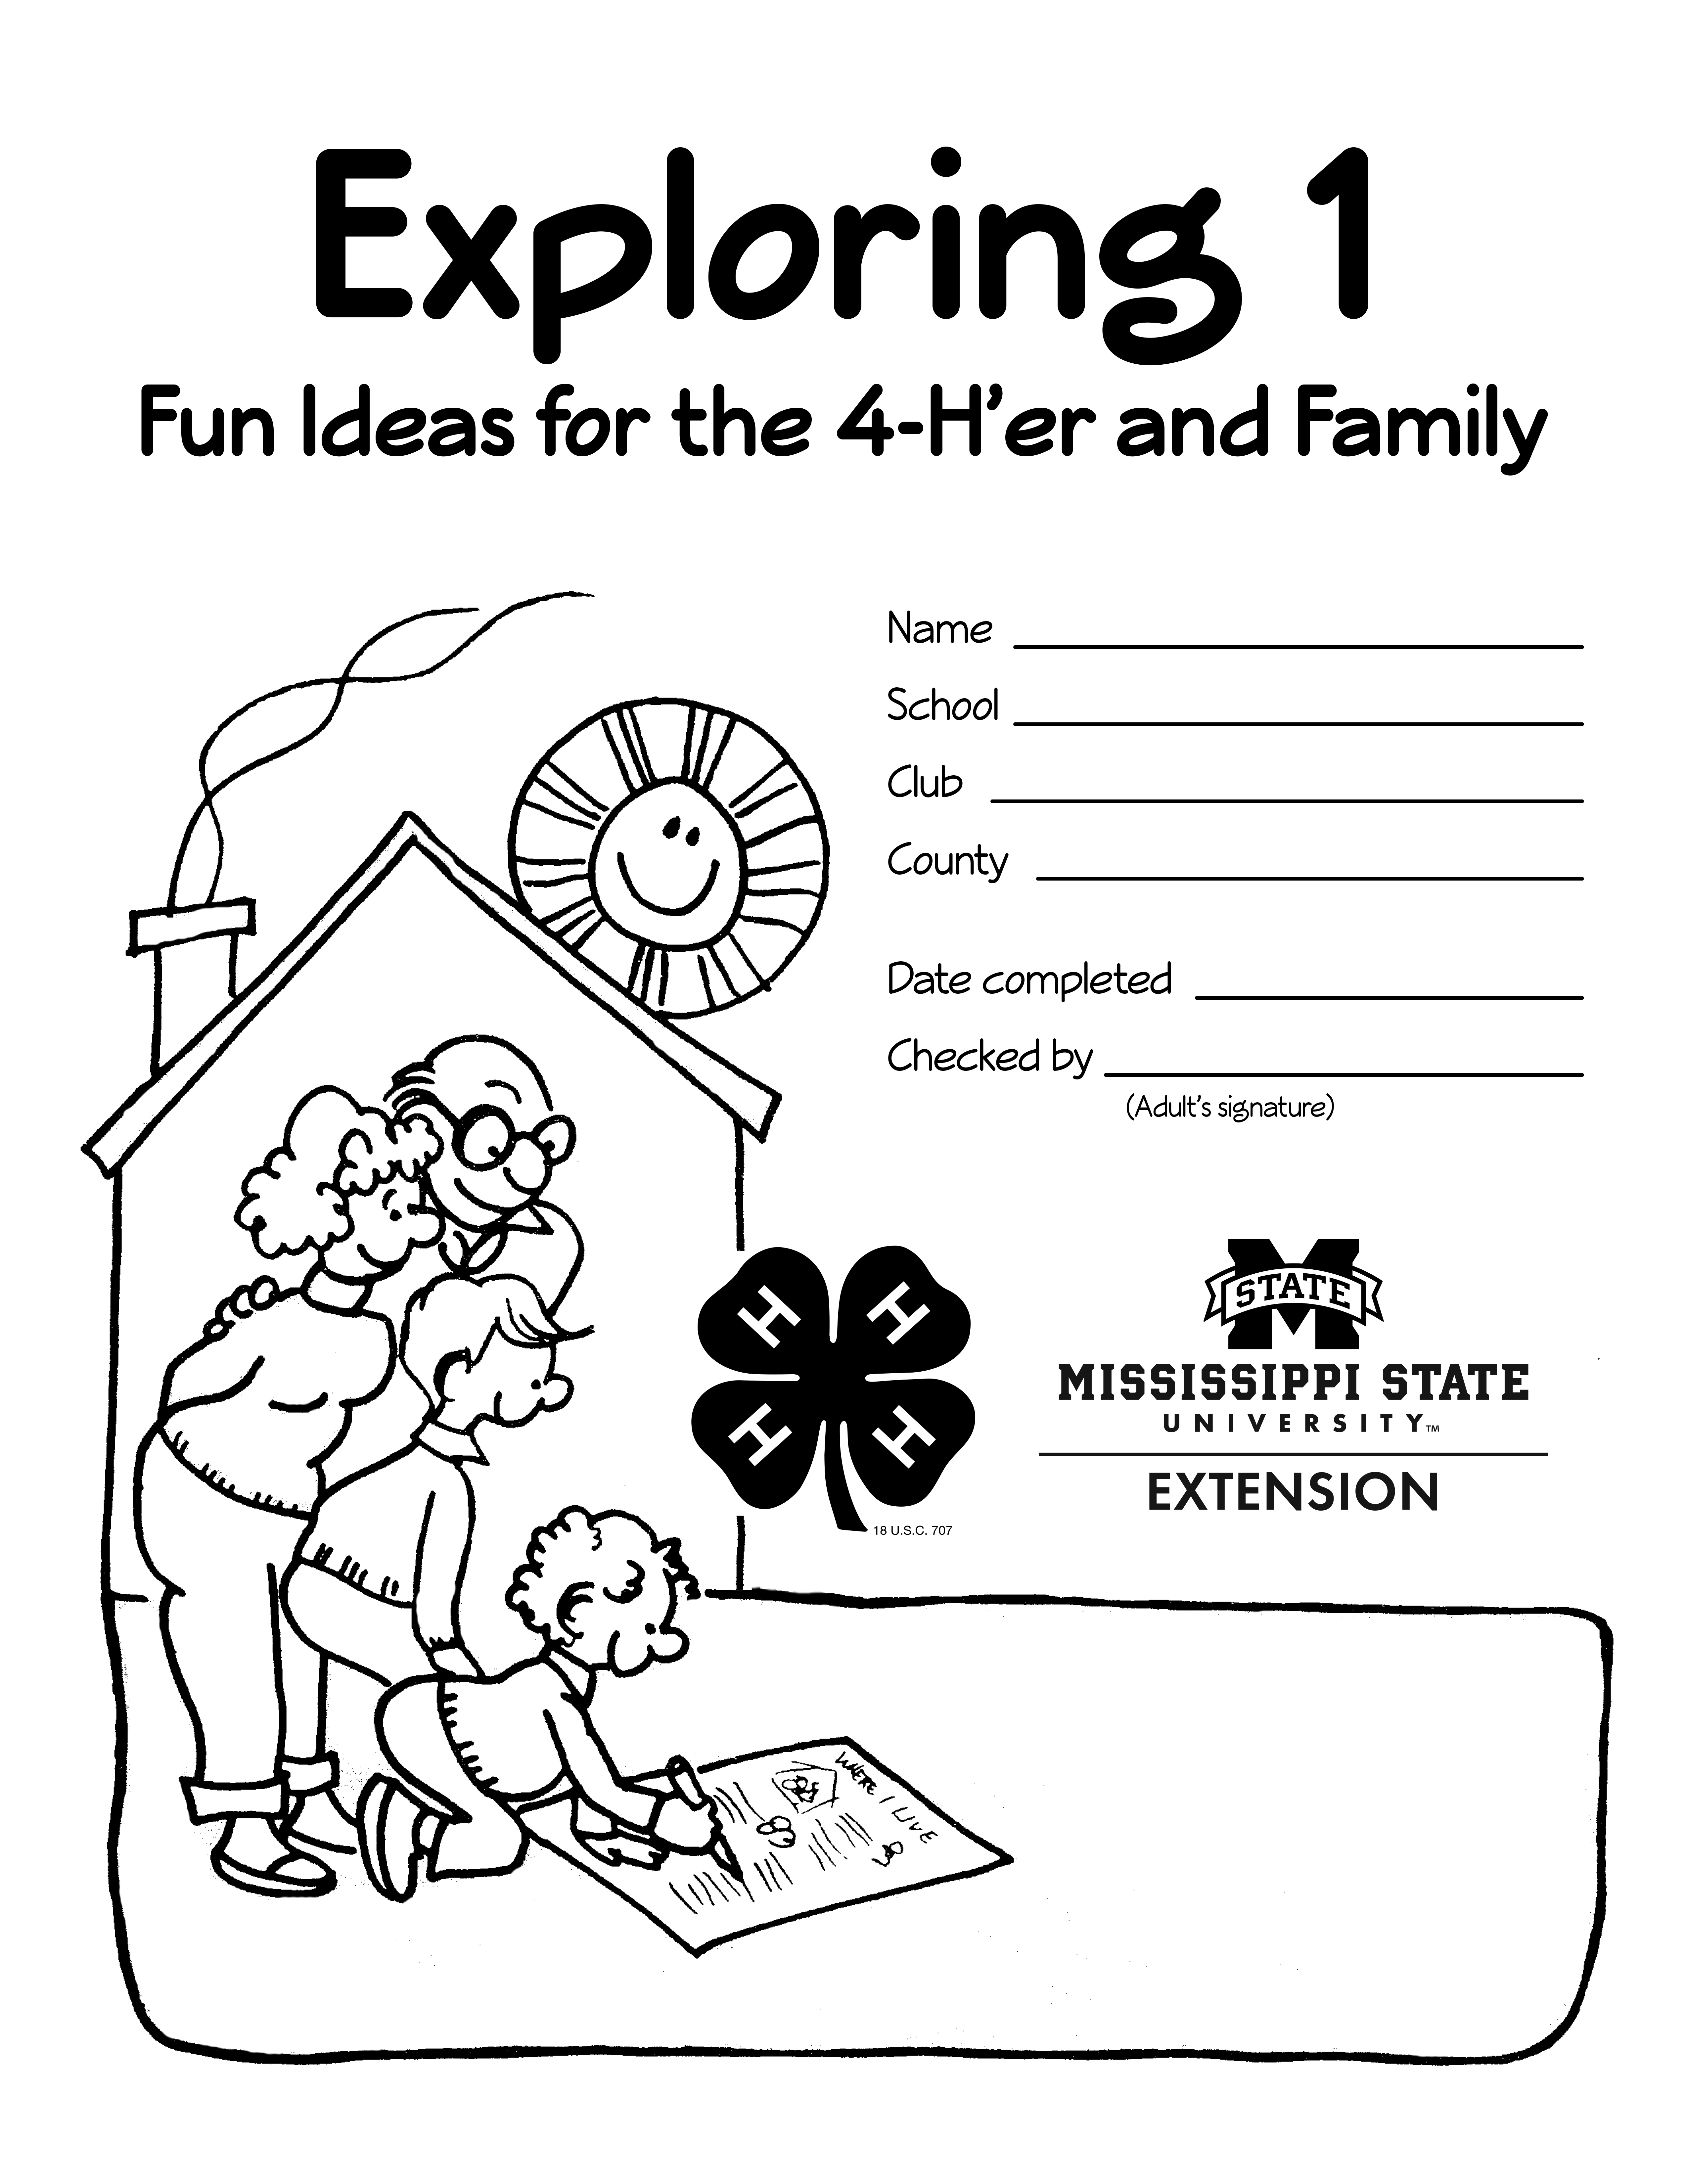 Cover of Exploring 4-H 1: Fun Ideas for the 4-H'er and Family. Includes spaces to put your name, school, club, county, and date completed. A drawing shows parents and an older sibling watching a small child write on a piece of paper.